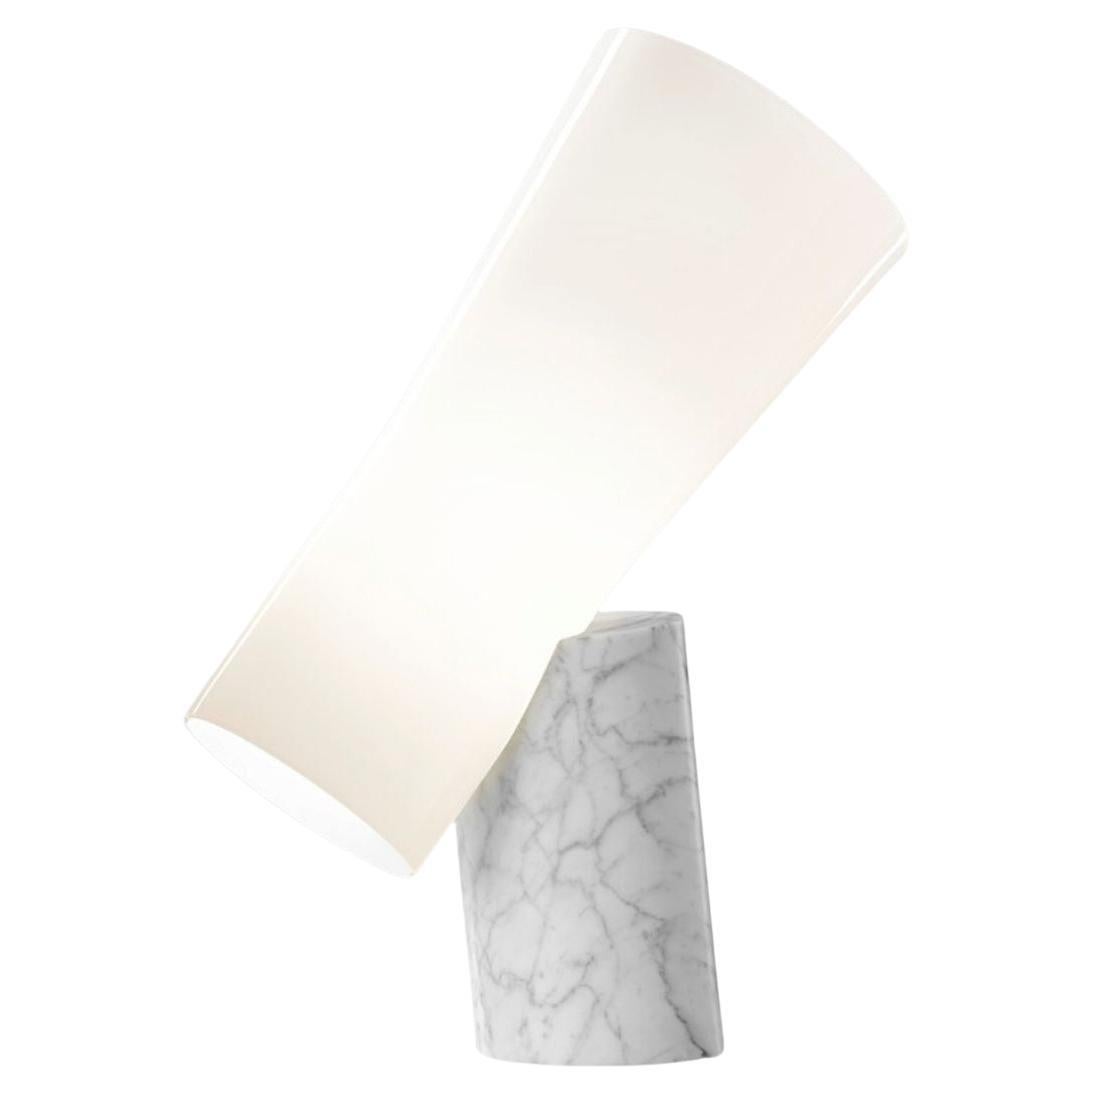 Dordoni ‘Nile’ Blown Glass and Black Marquina Marble Table Lamp For Foscarini For Sale 1